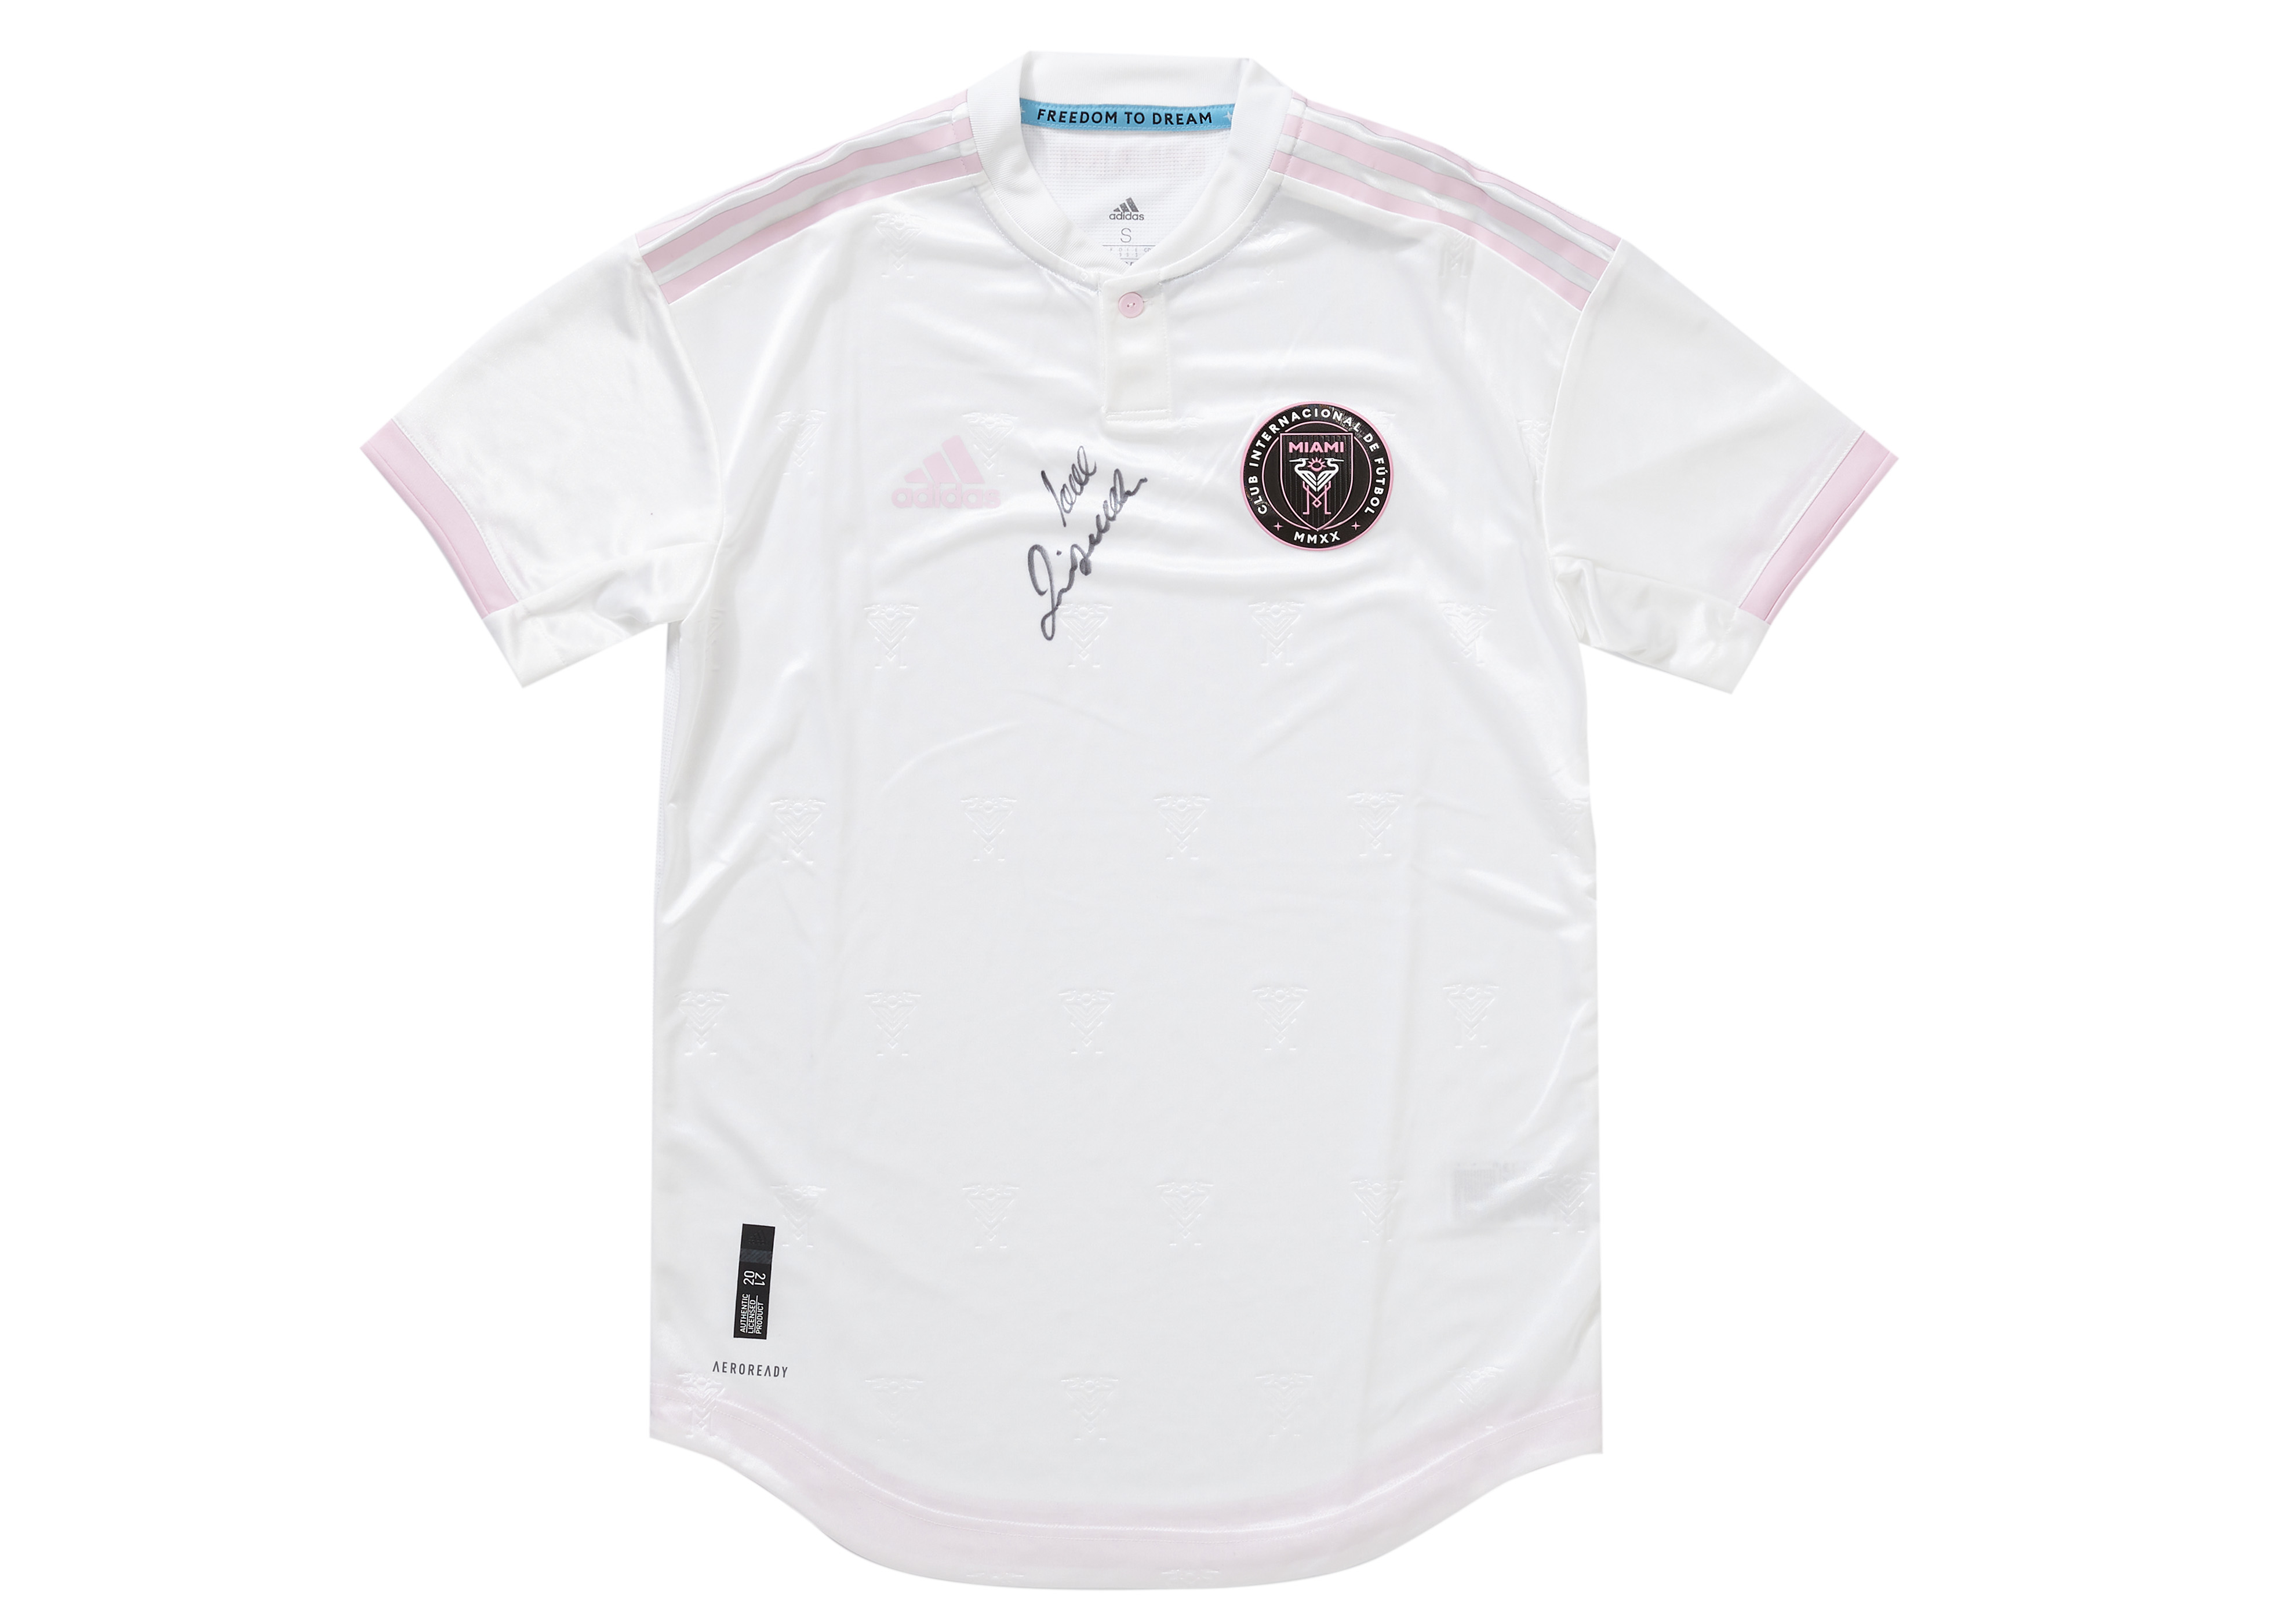 David Beckham Signed Inter Miami Jersey Charity Campaign メンズ - JP